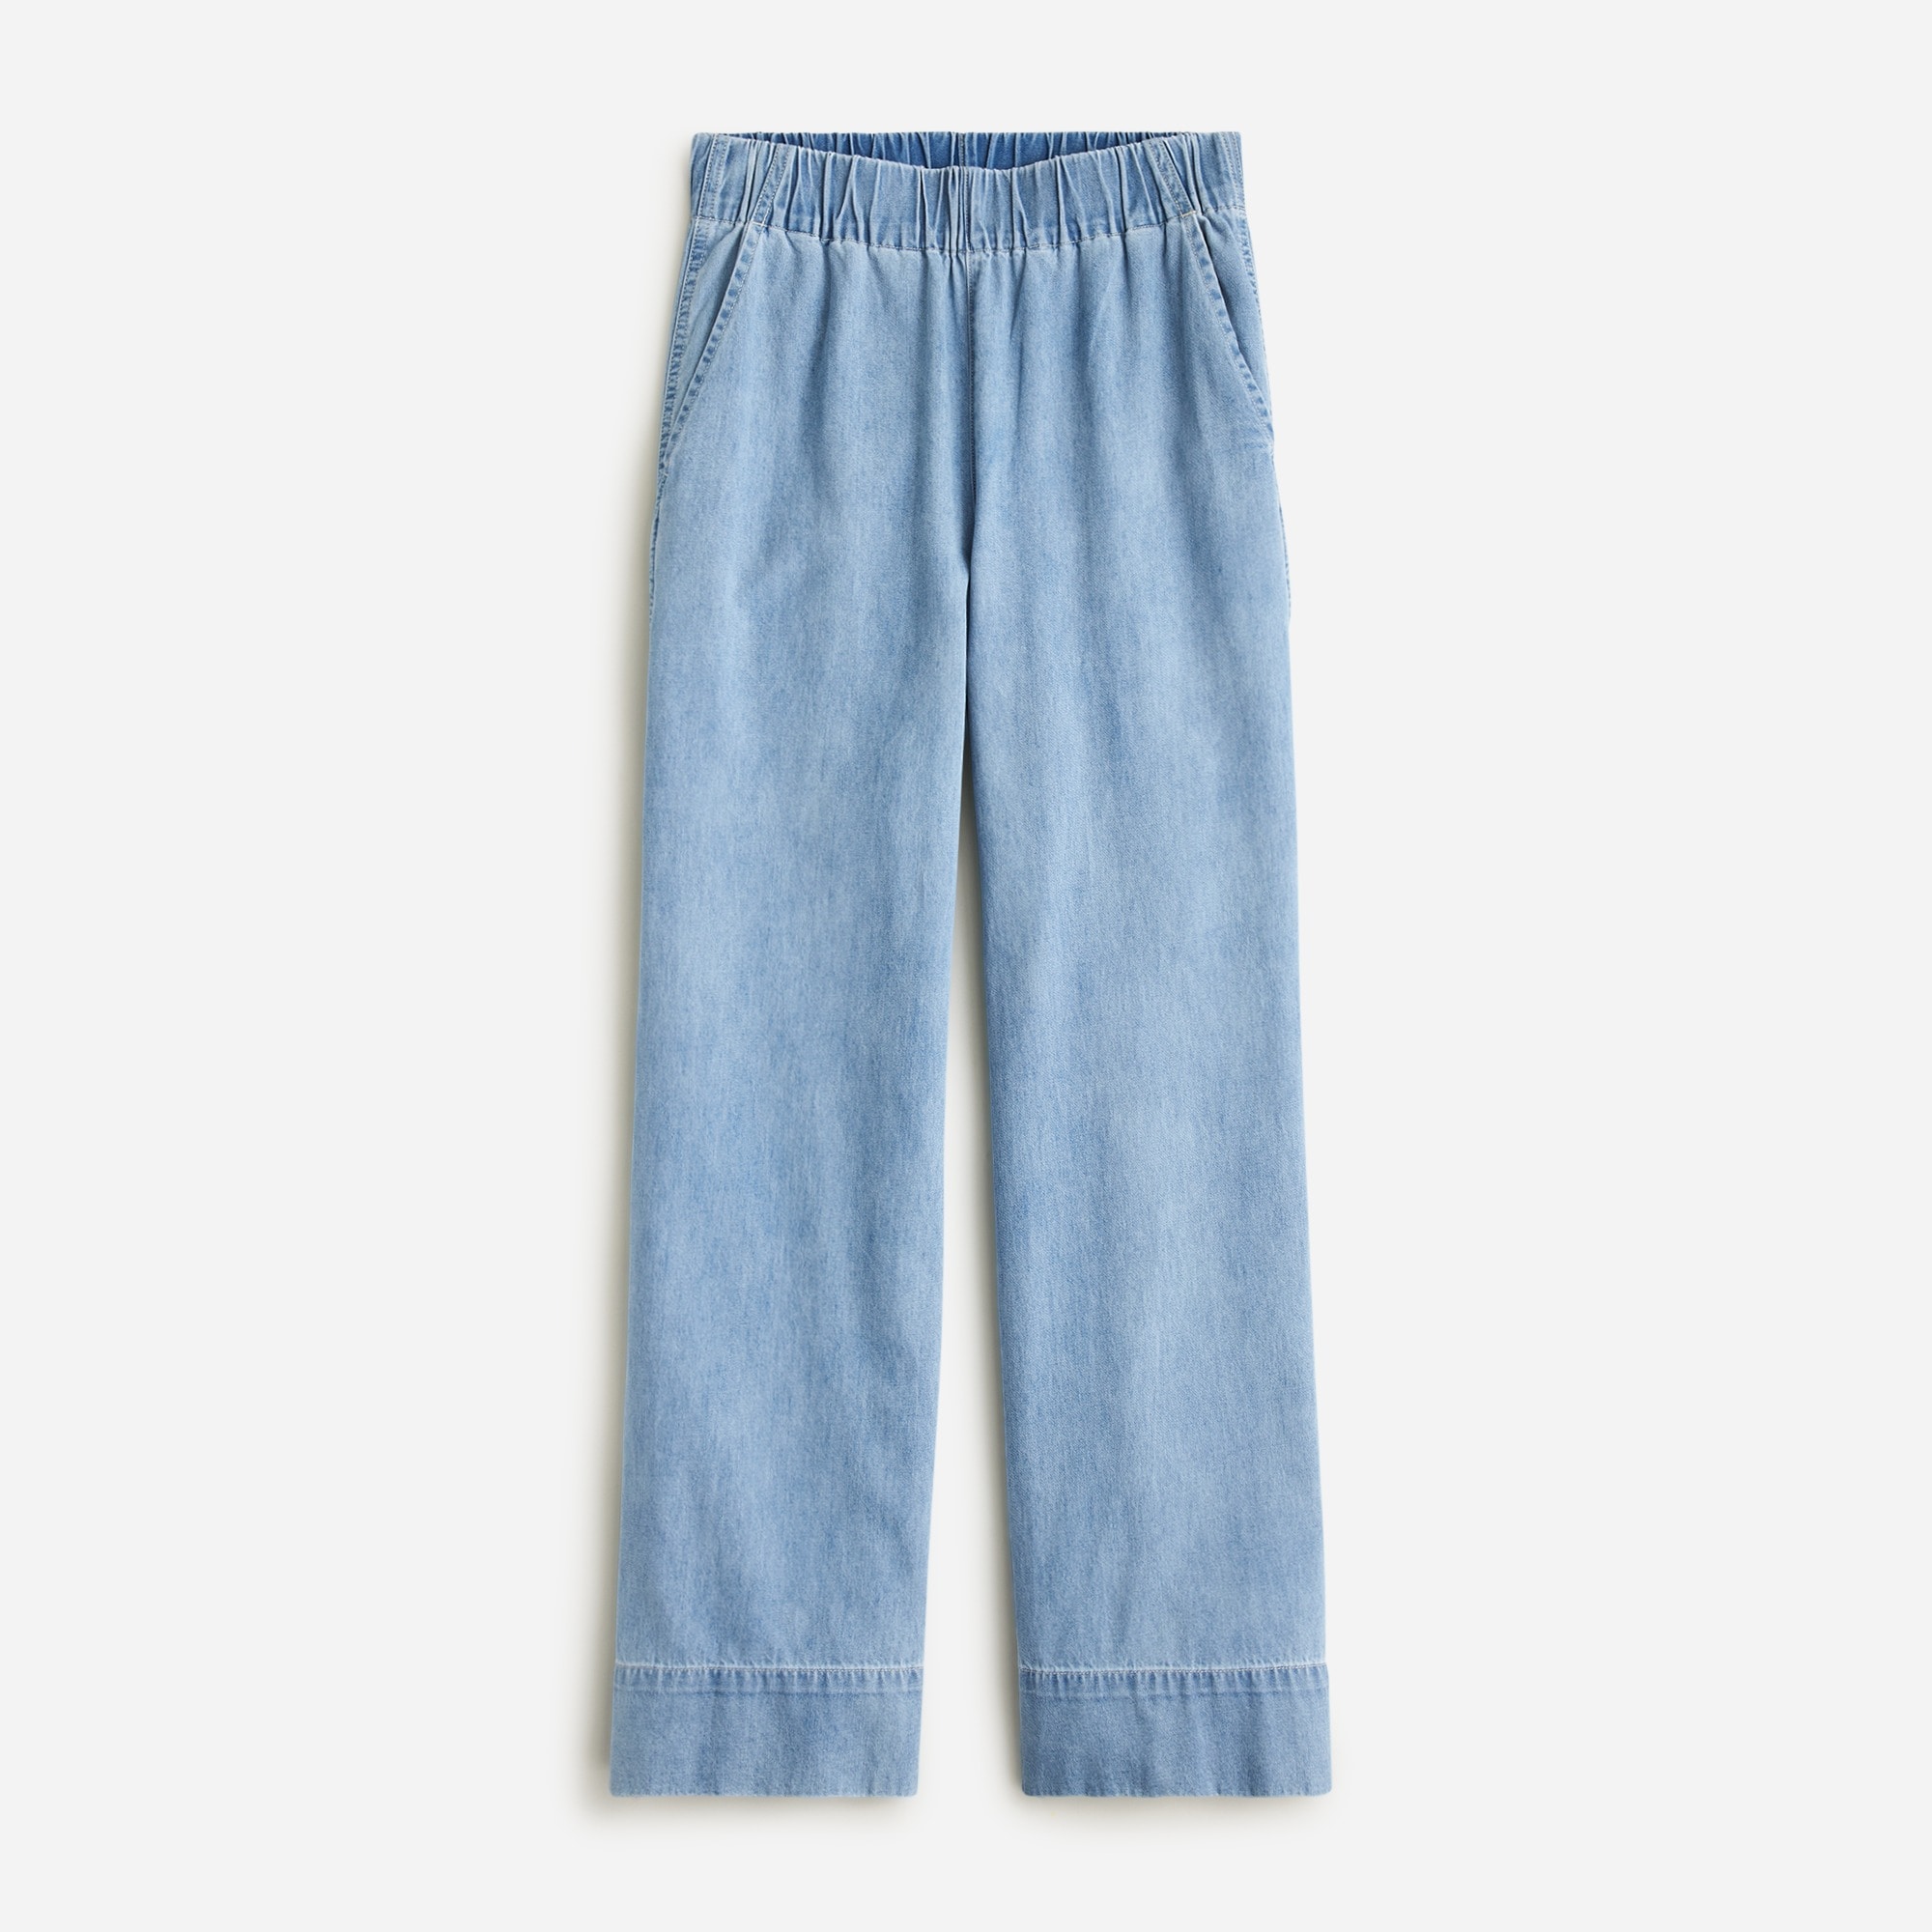  Astrid pant in chambray